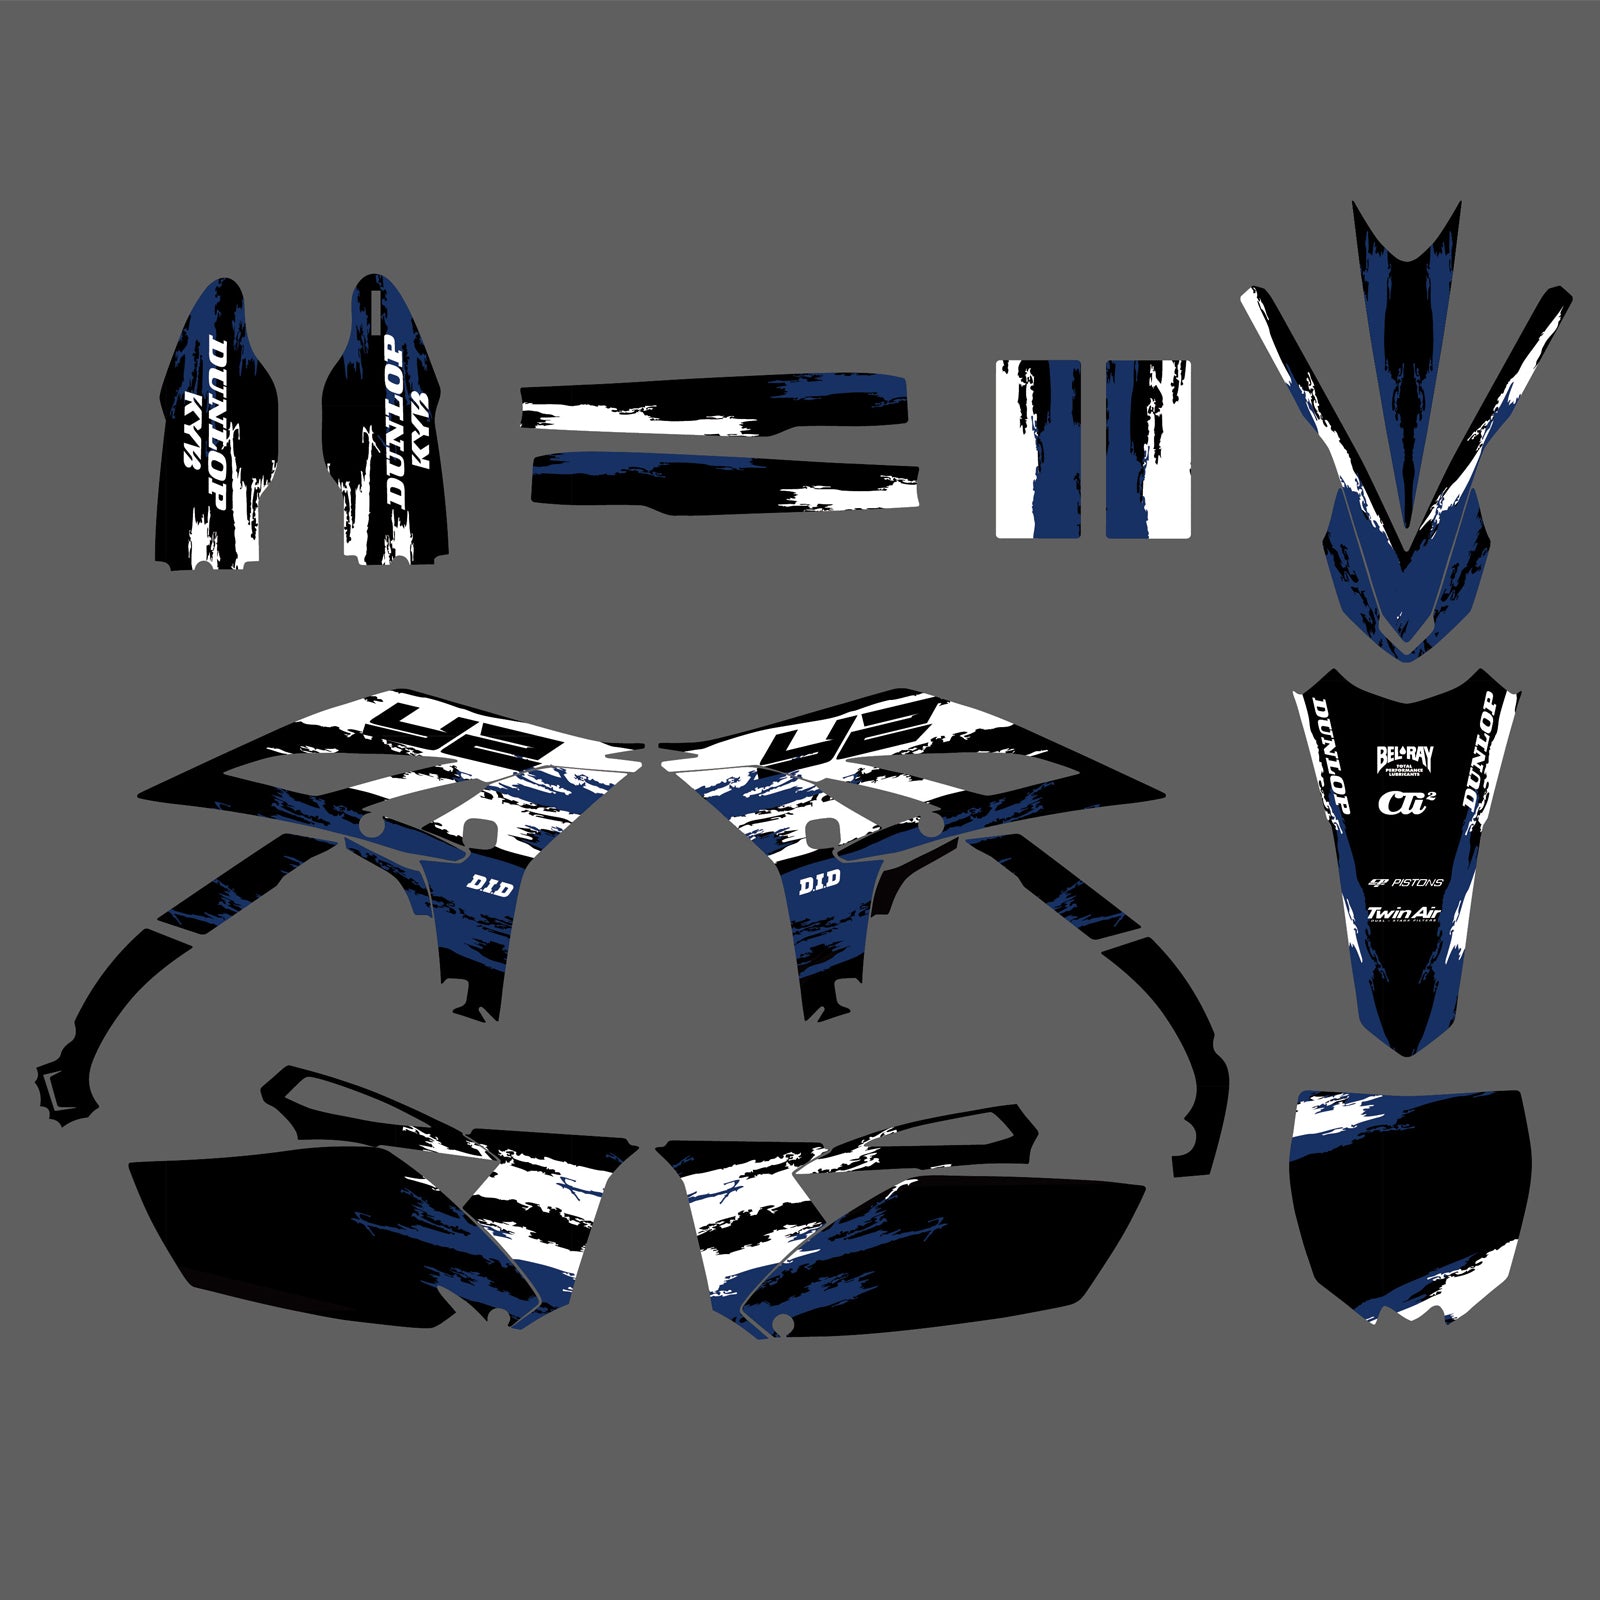 Team Decals Stickers Graphics Kit For YAMAHA YZF250	2010-2013